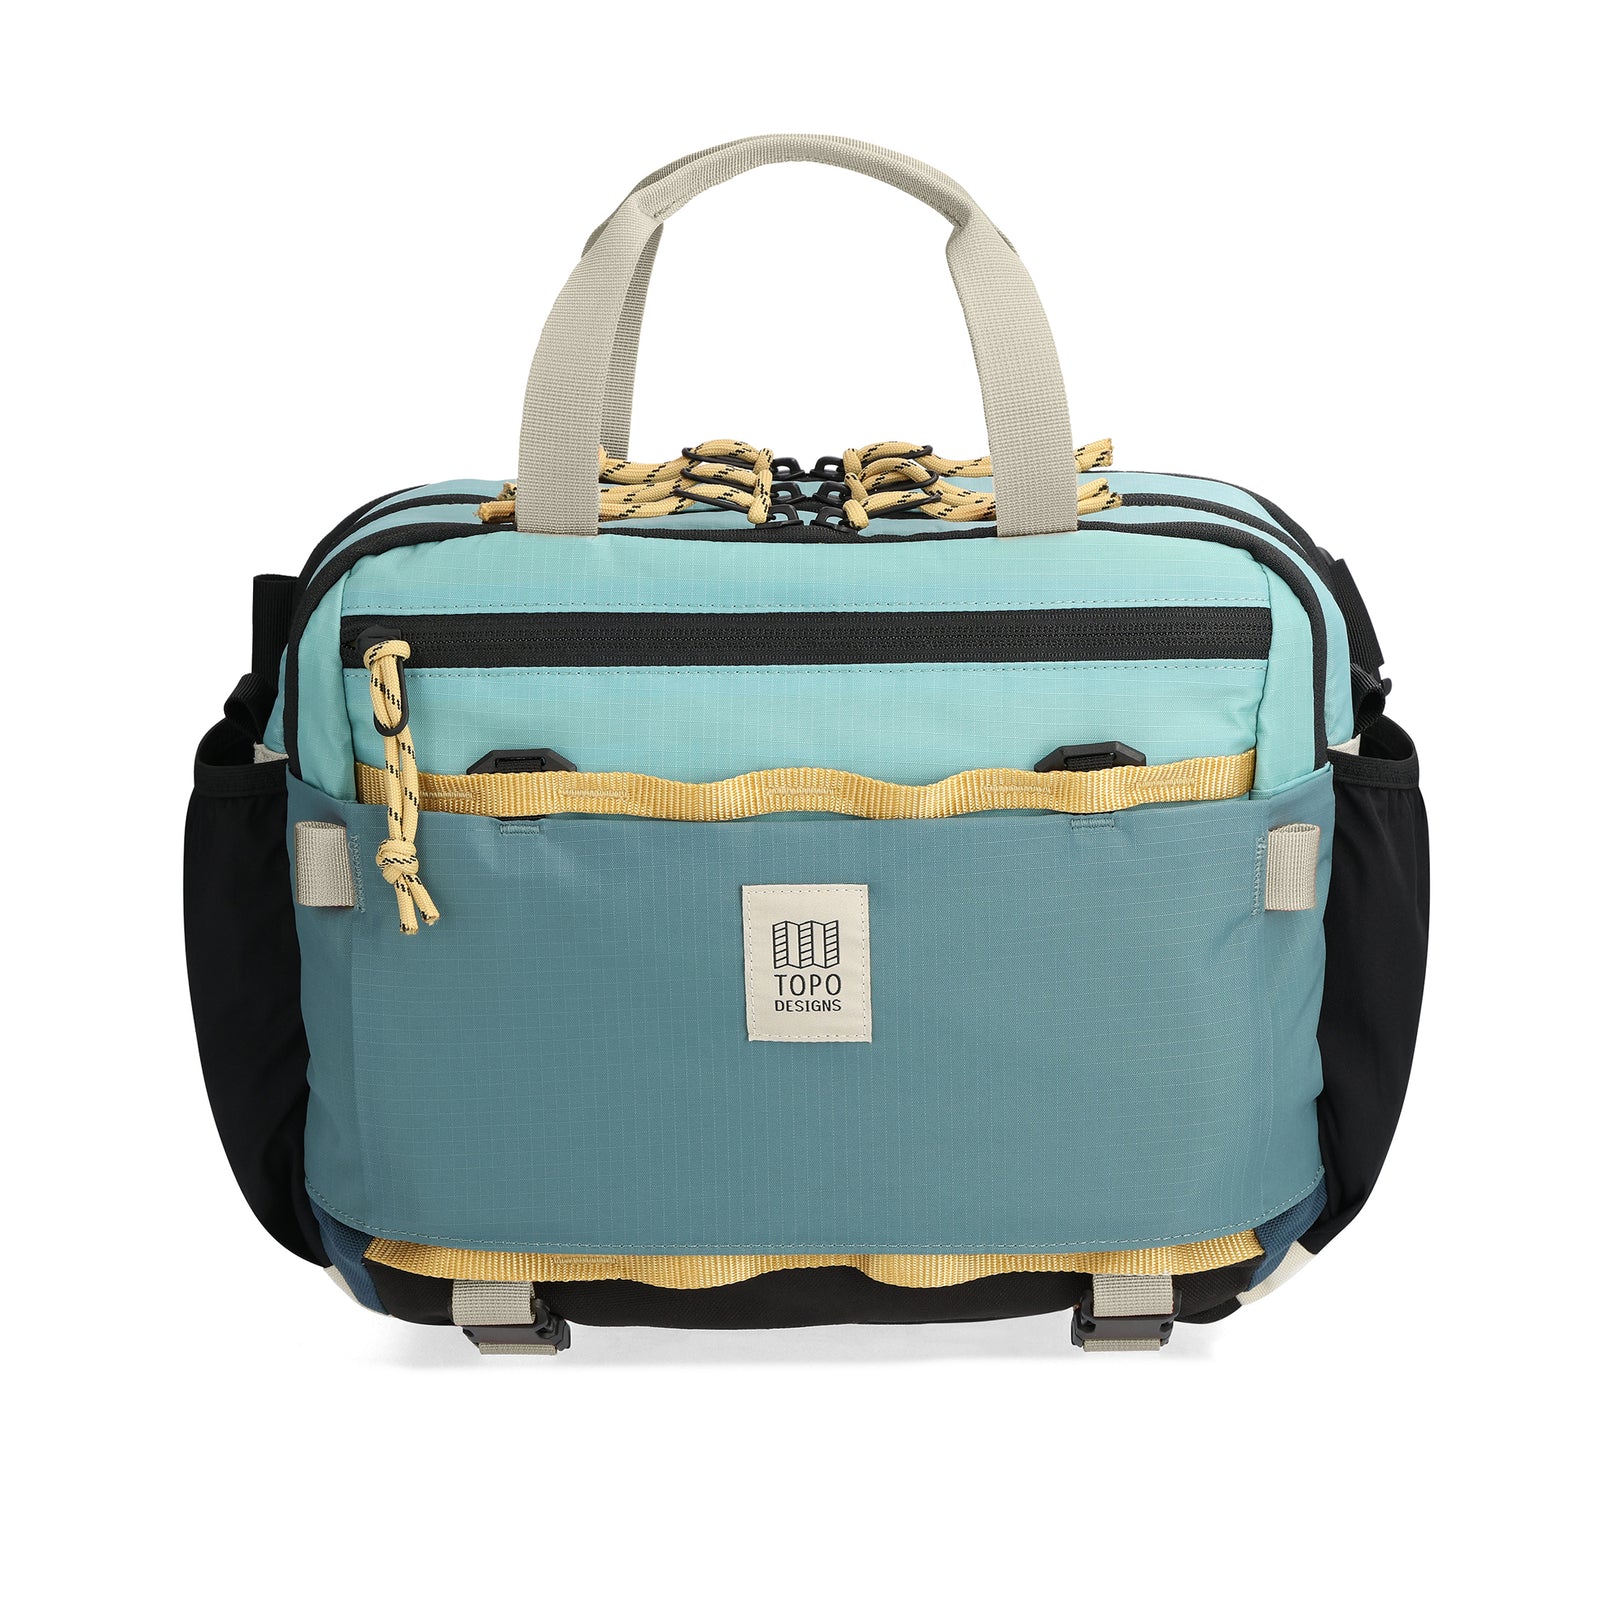 Front View of Topo Designs Mountain Cross Bag in "Geode Green / Sea Pine"